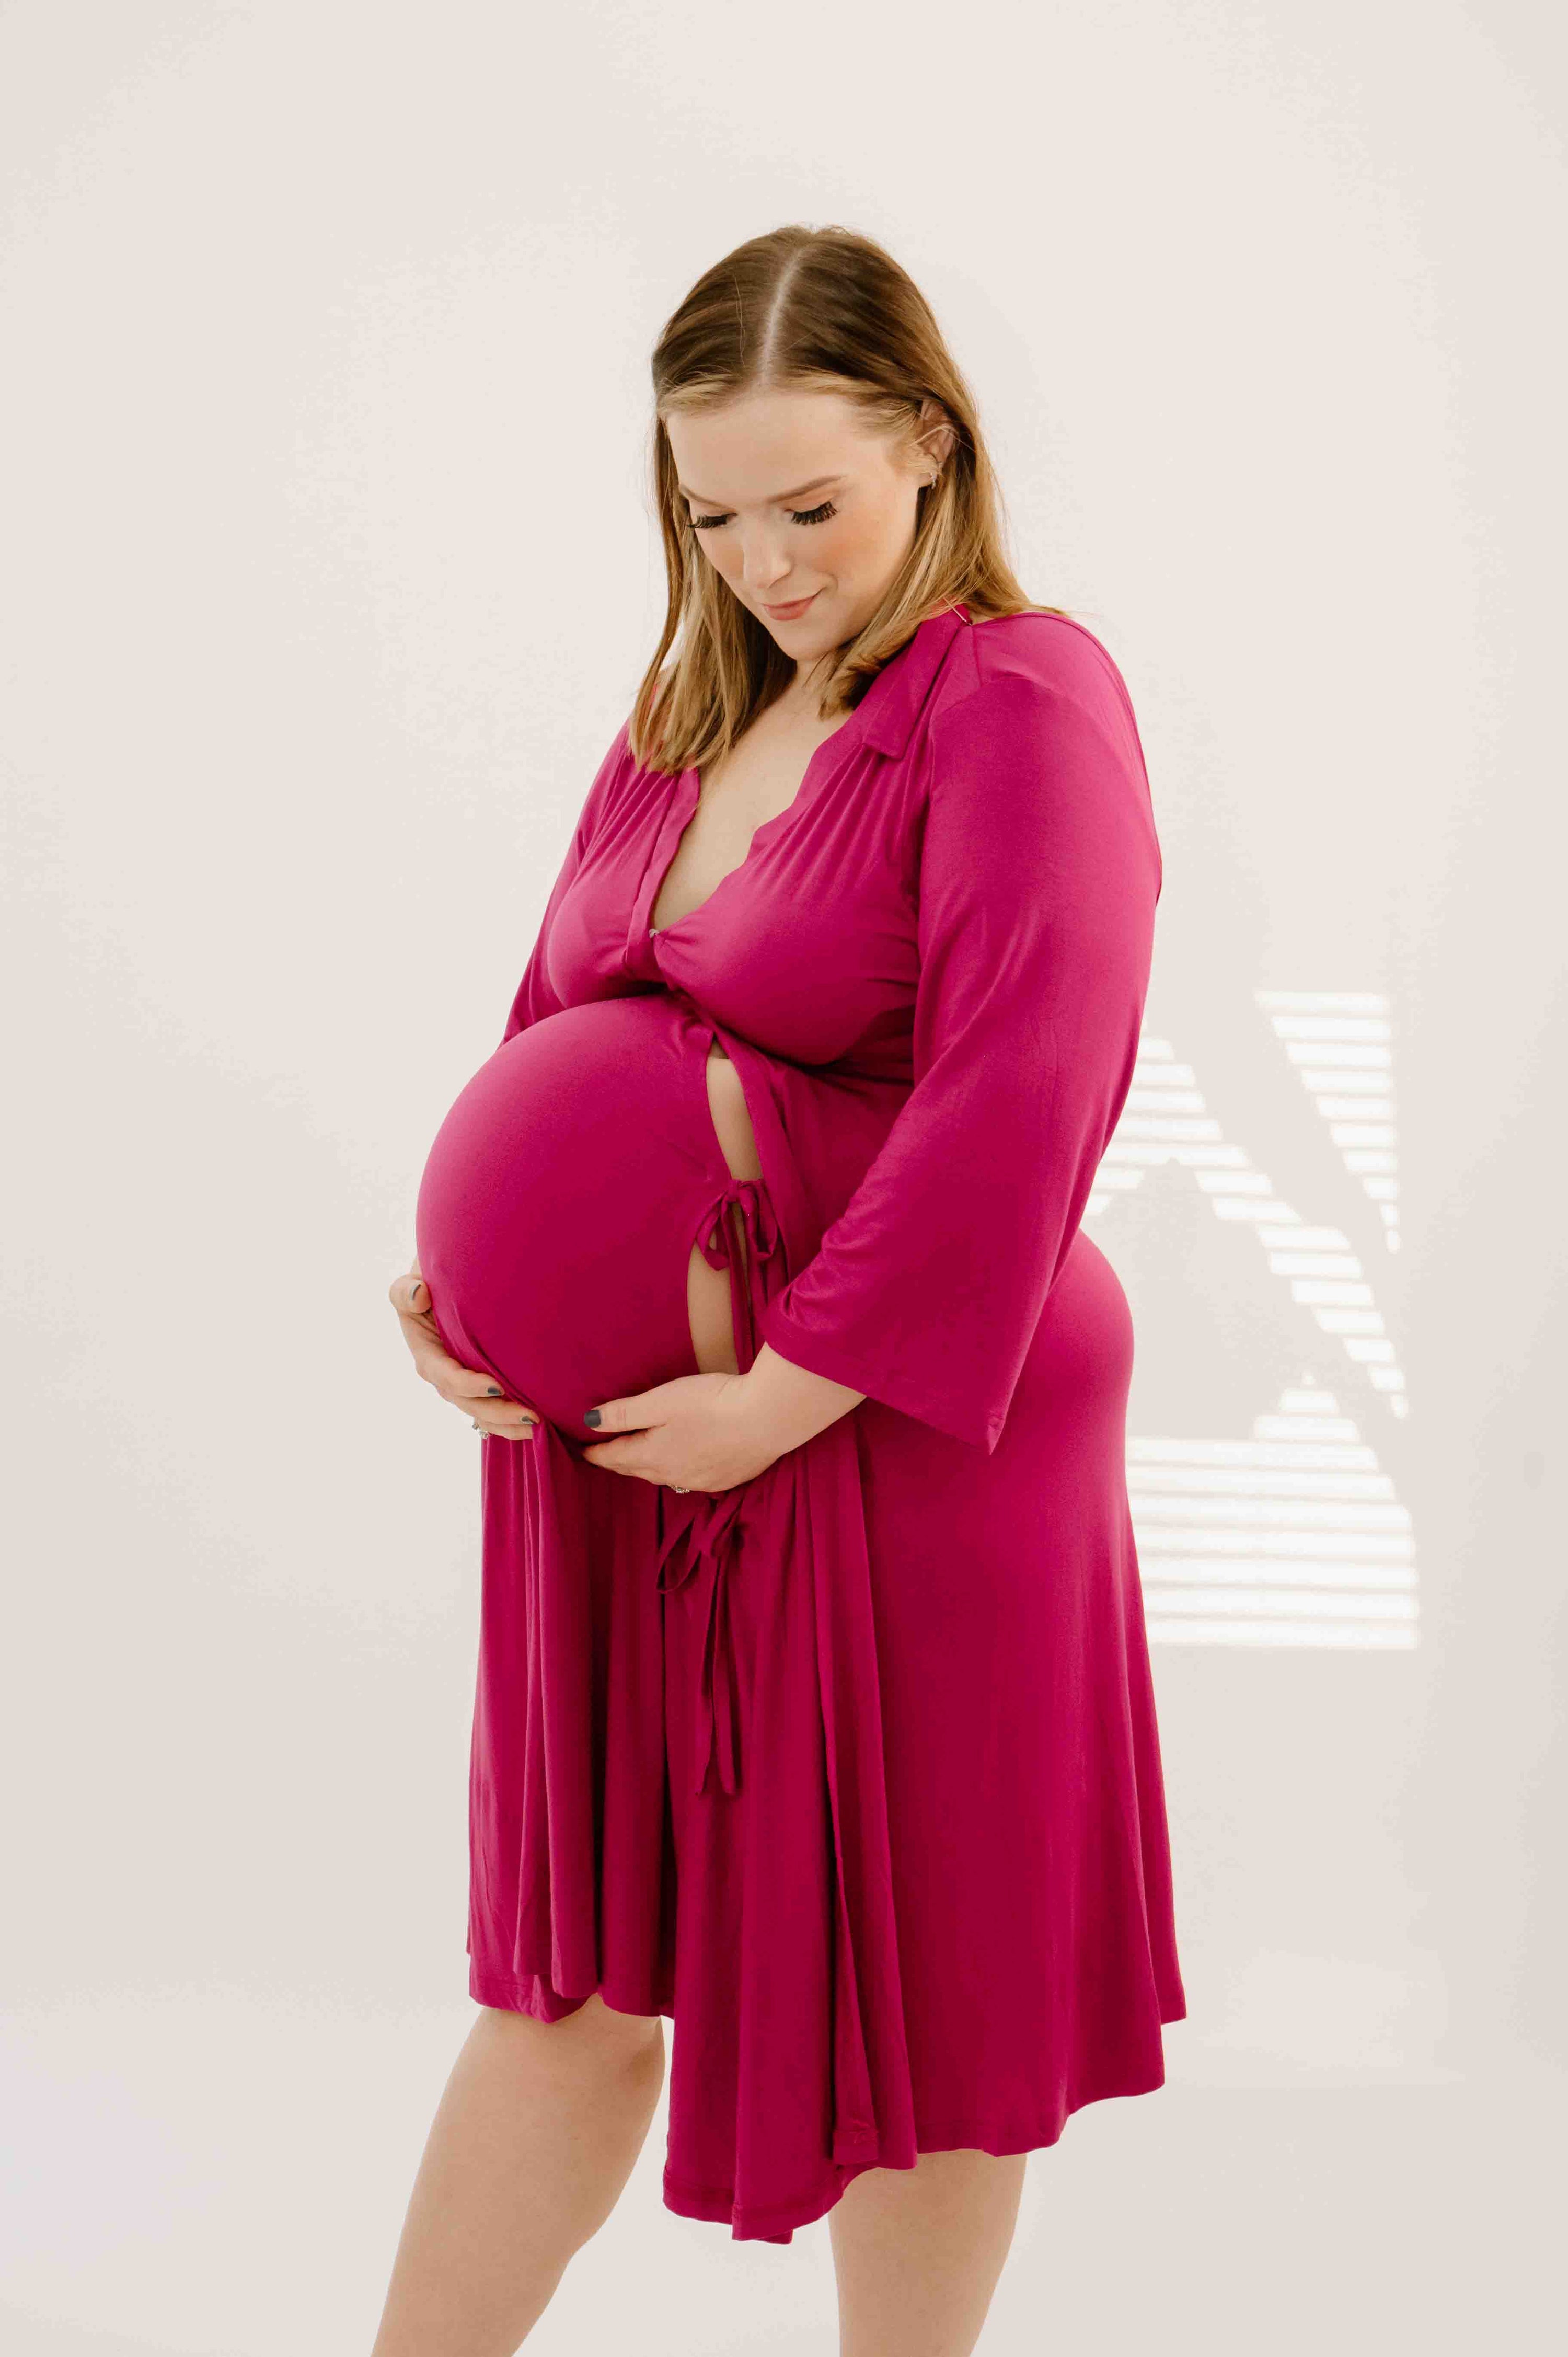 Lila Labor & Postpartum Gown in Raspberry Red